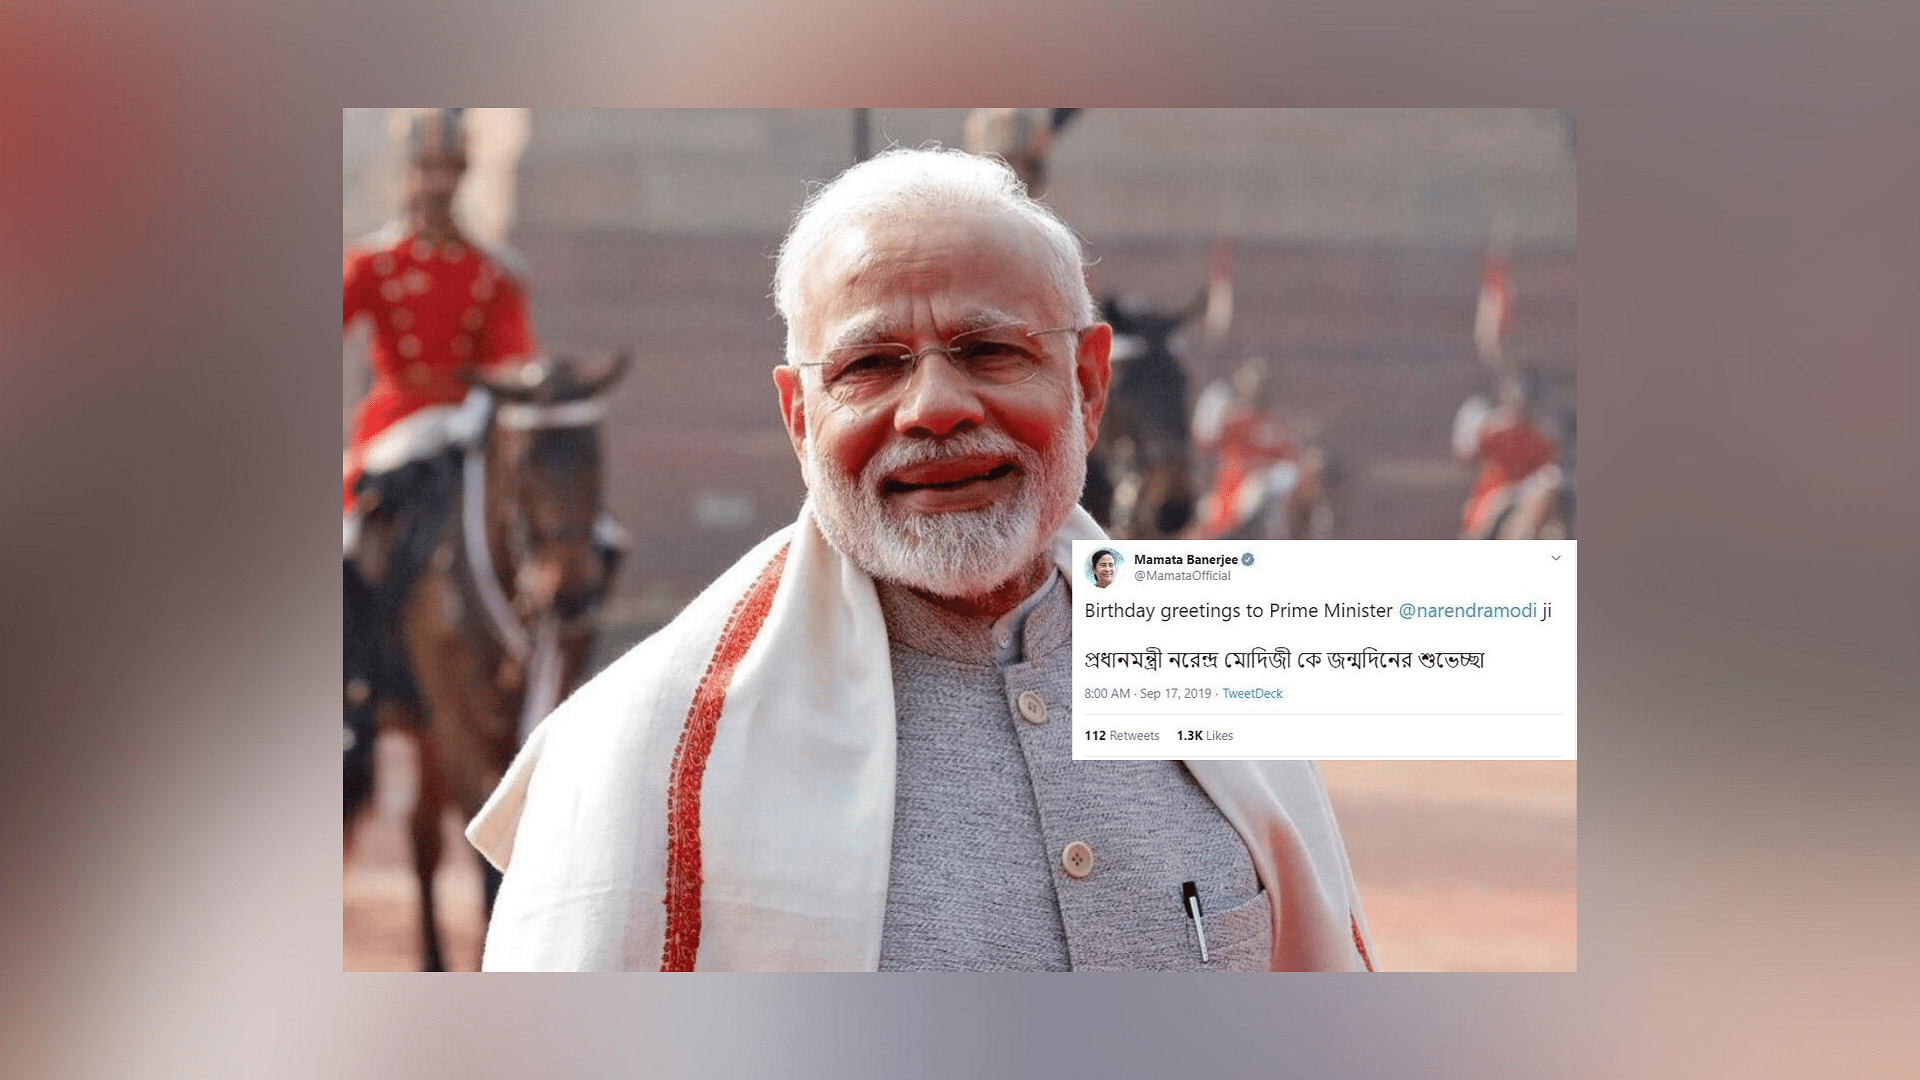 Twitter flooded with birthday wishes for PM Modi.